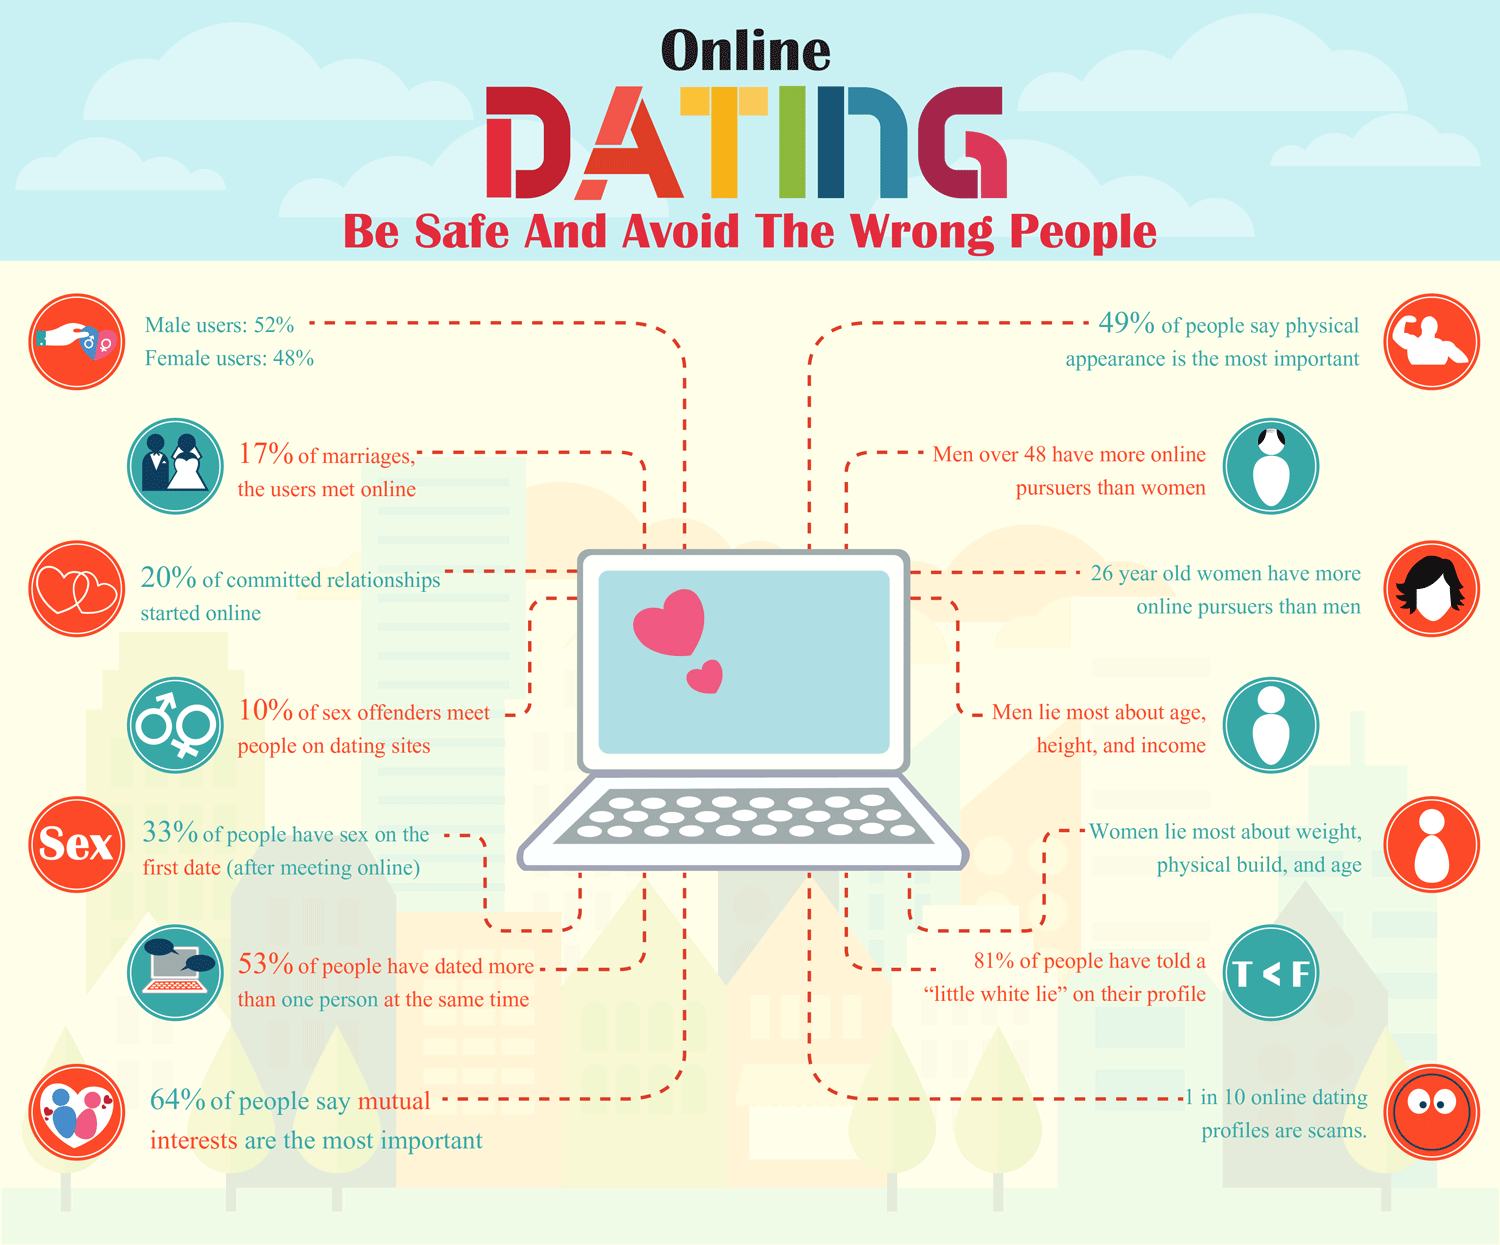 Online dating tips